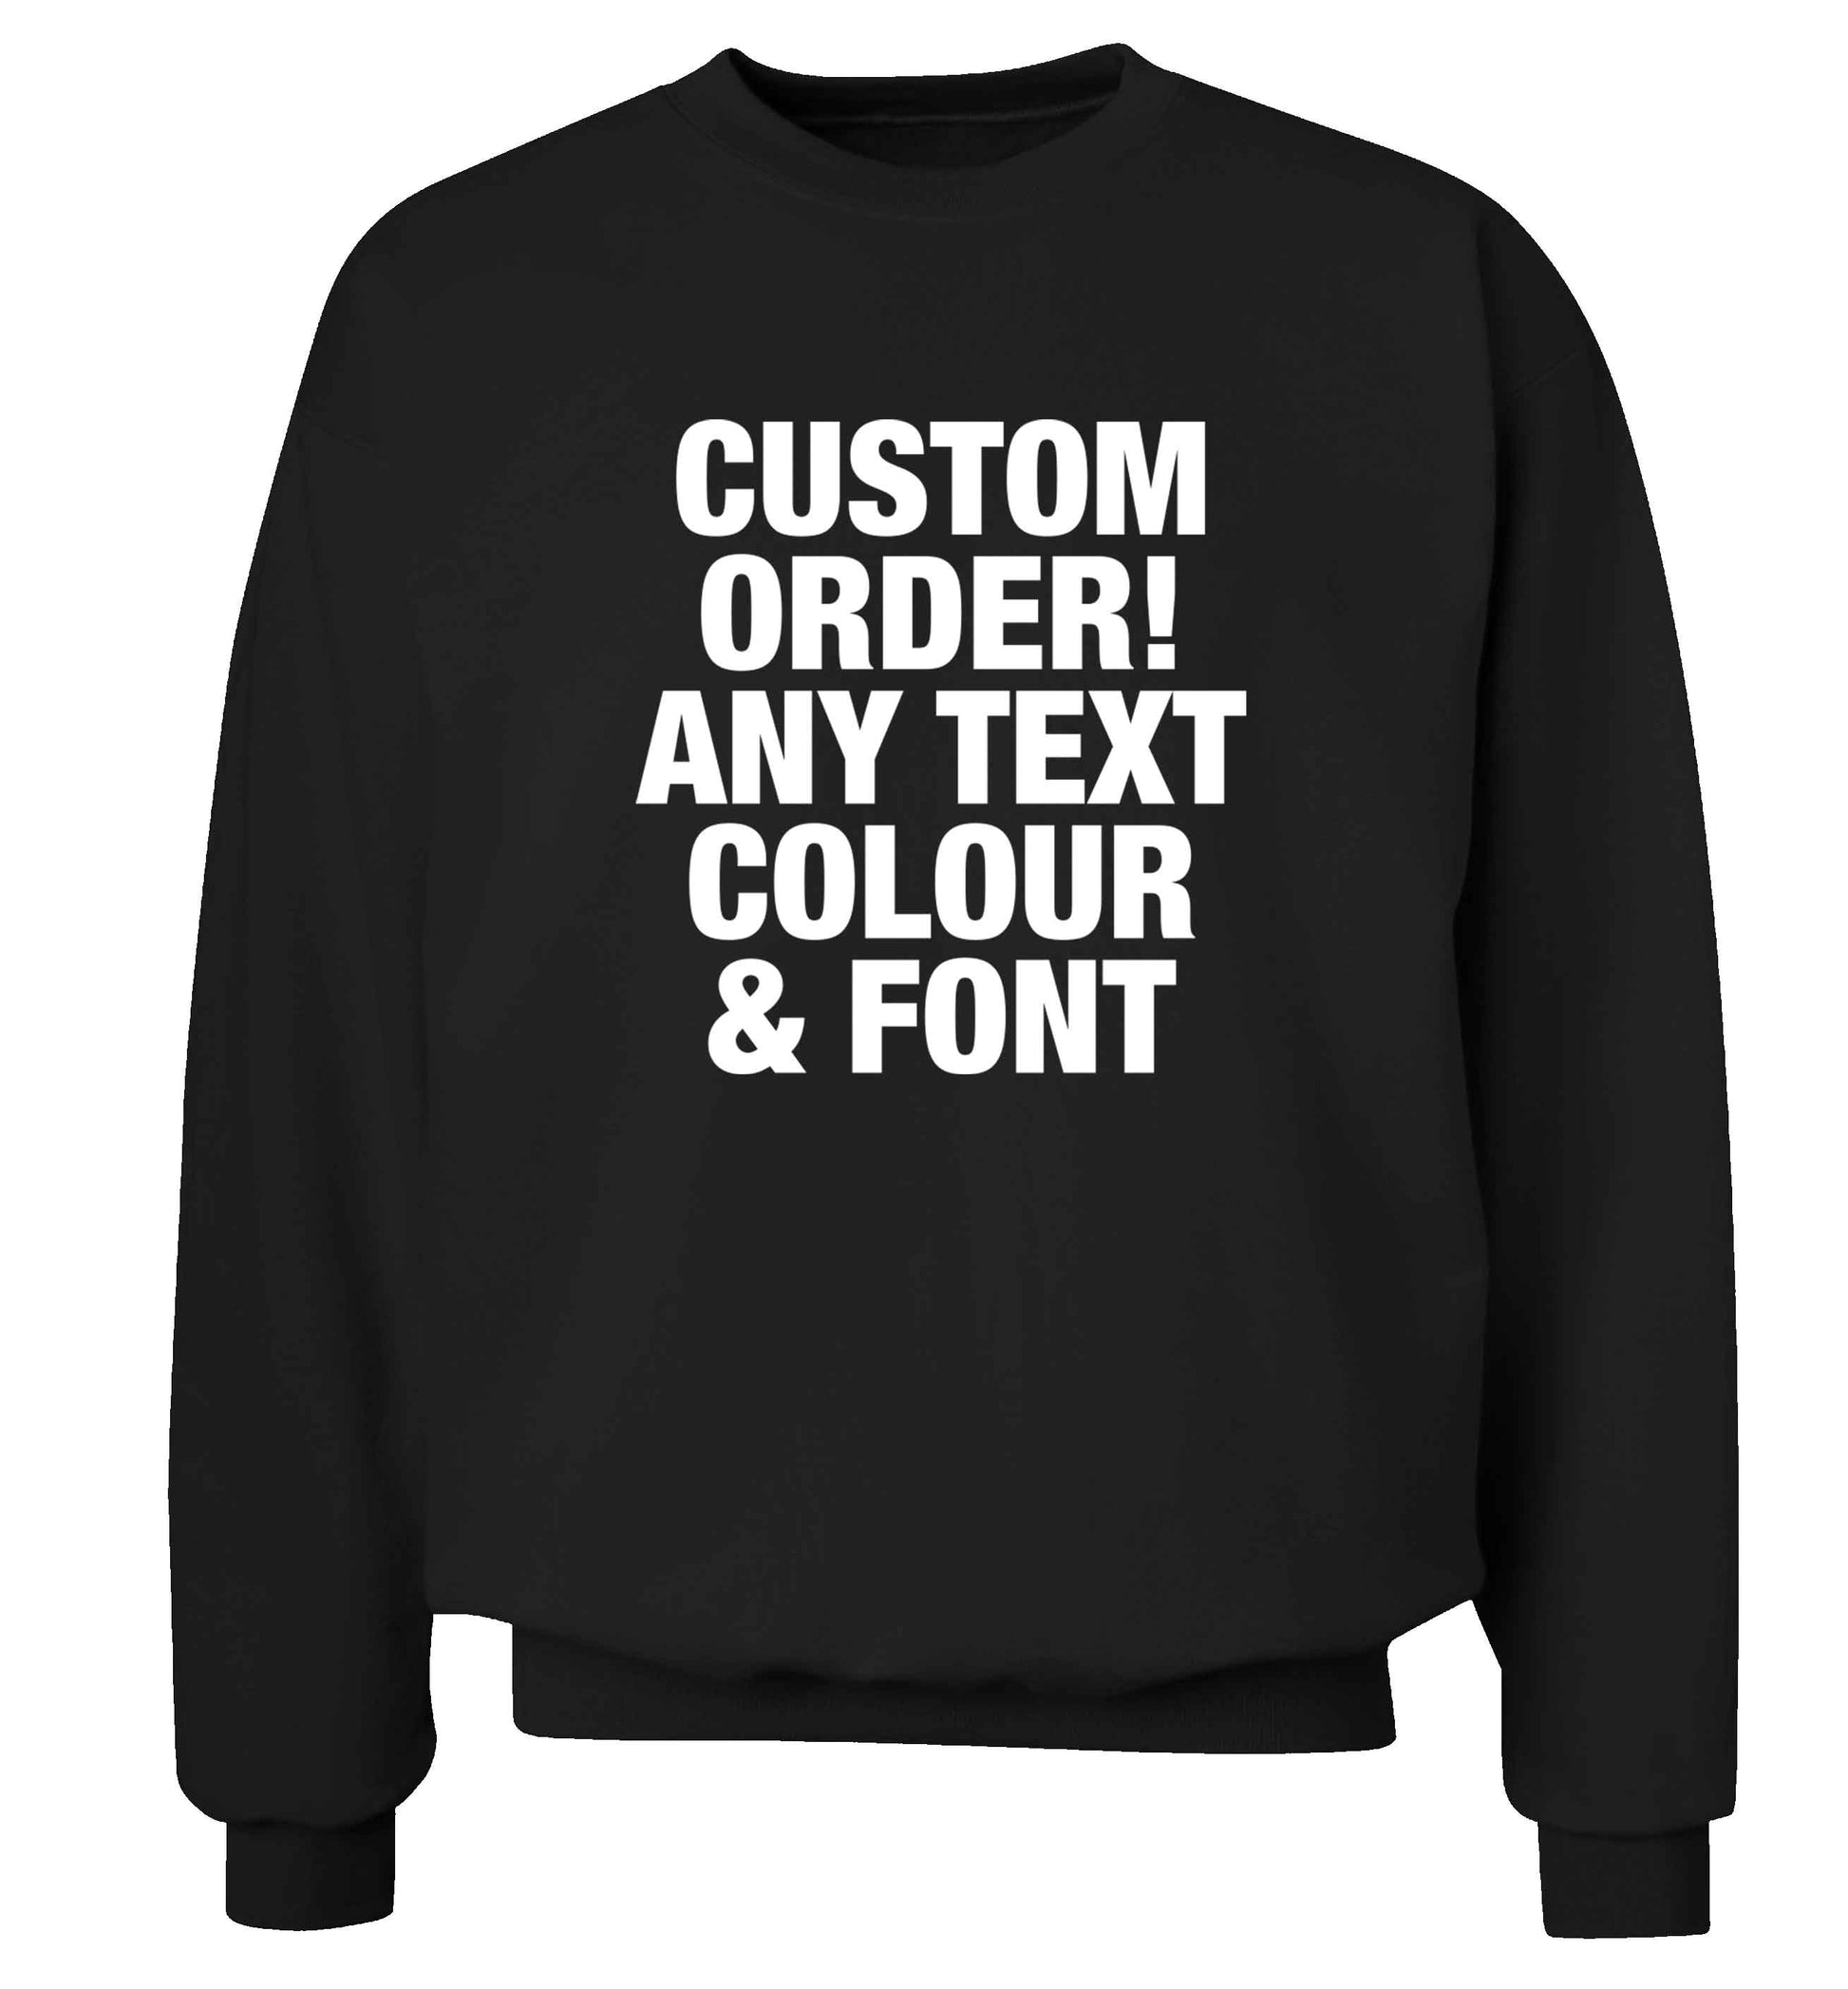 Custom order any text colour and font adult's unisex black sweater 2XL